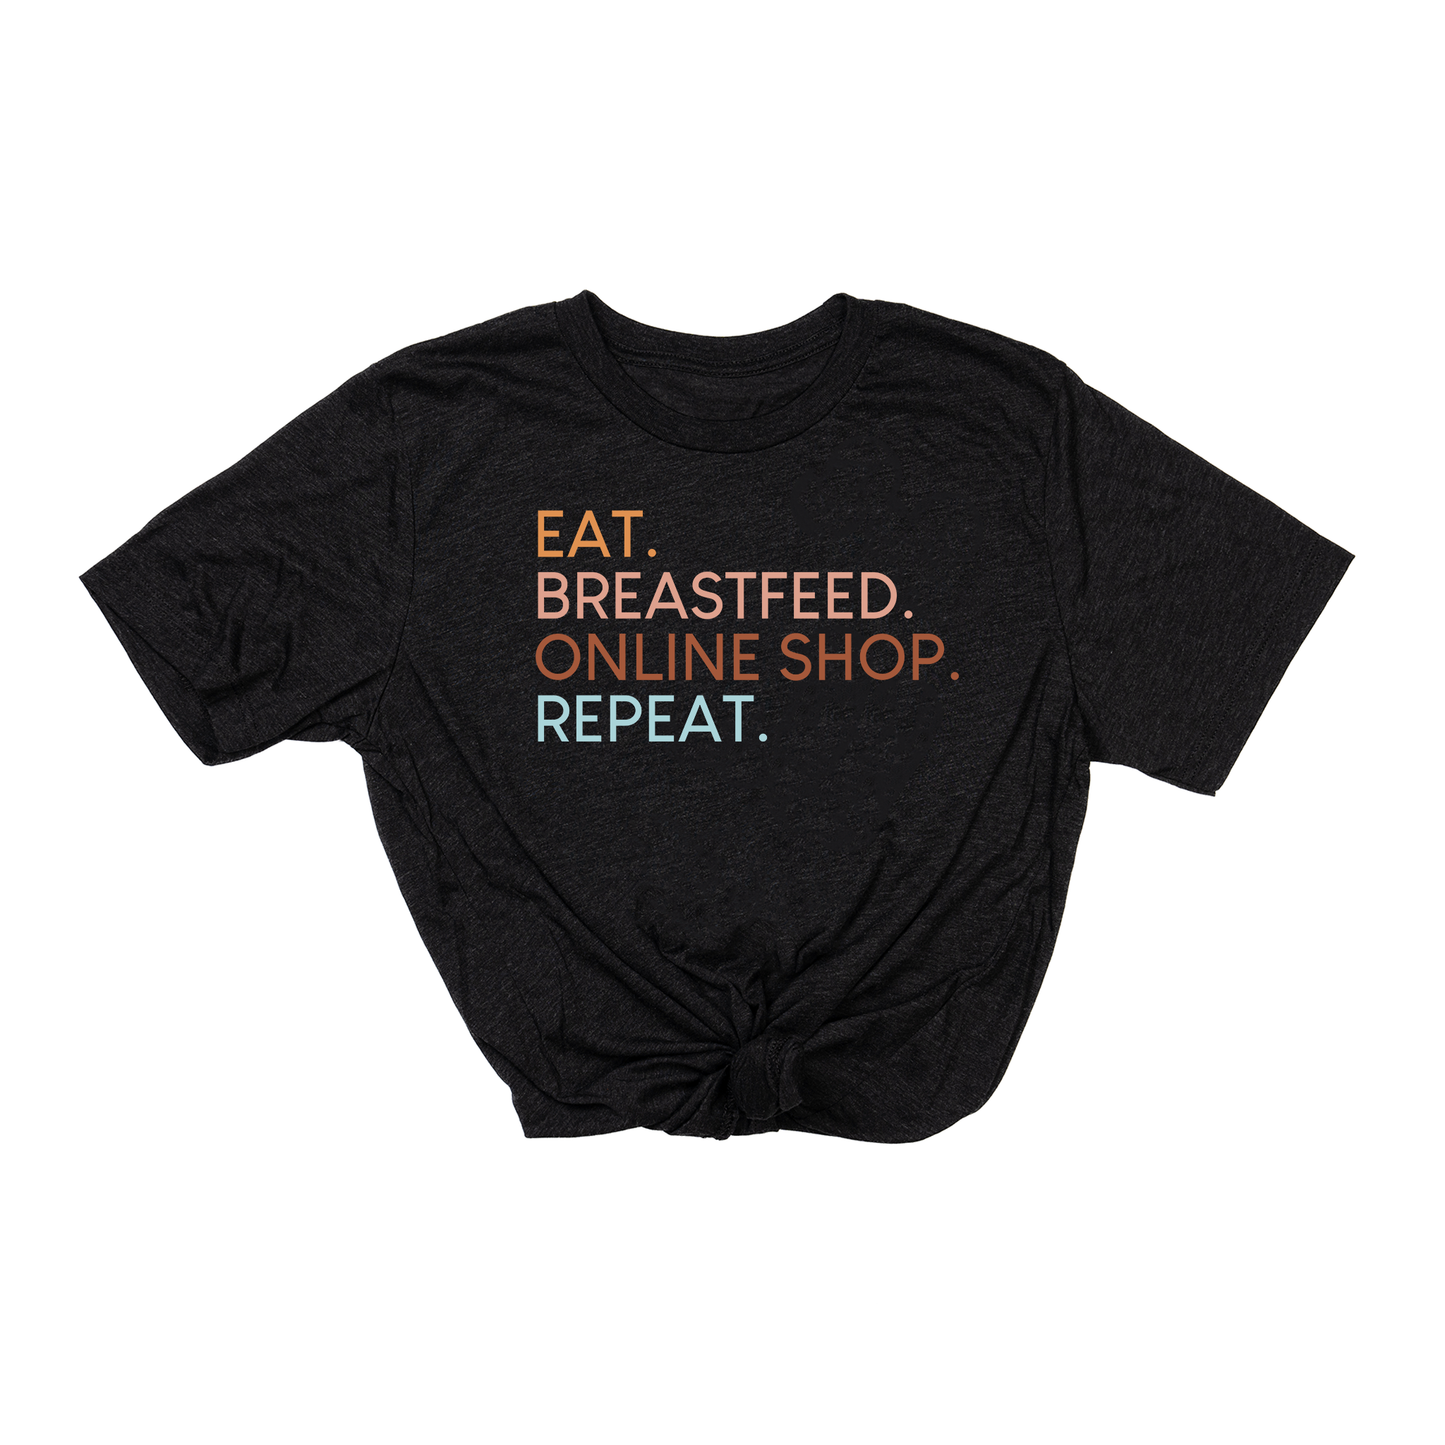 Eat. Breastfeed. Online Shop. Repeat. (Across Front) - Tee (Charcoal Black)